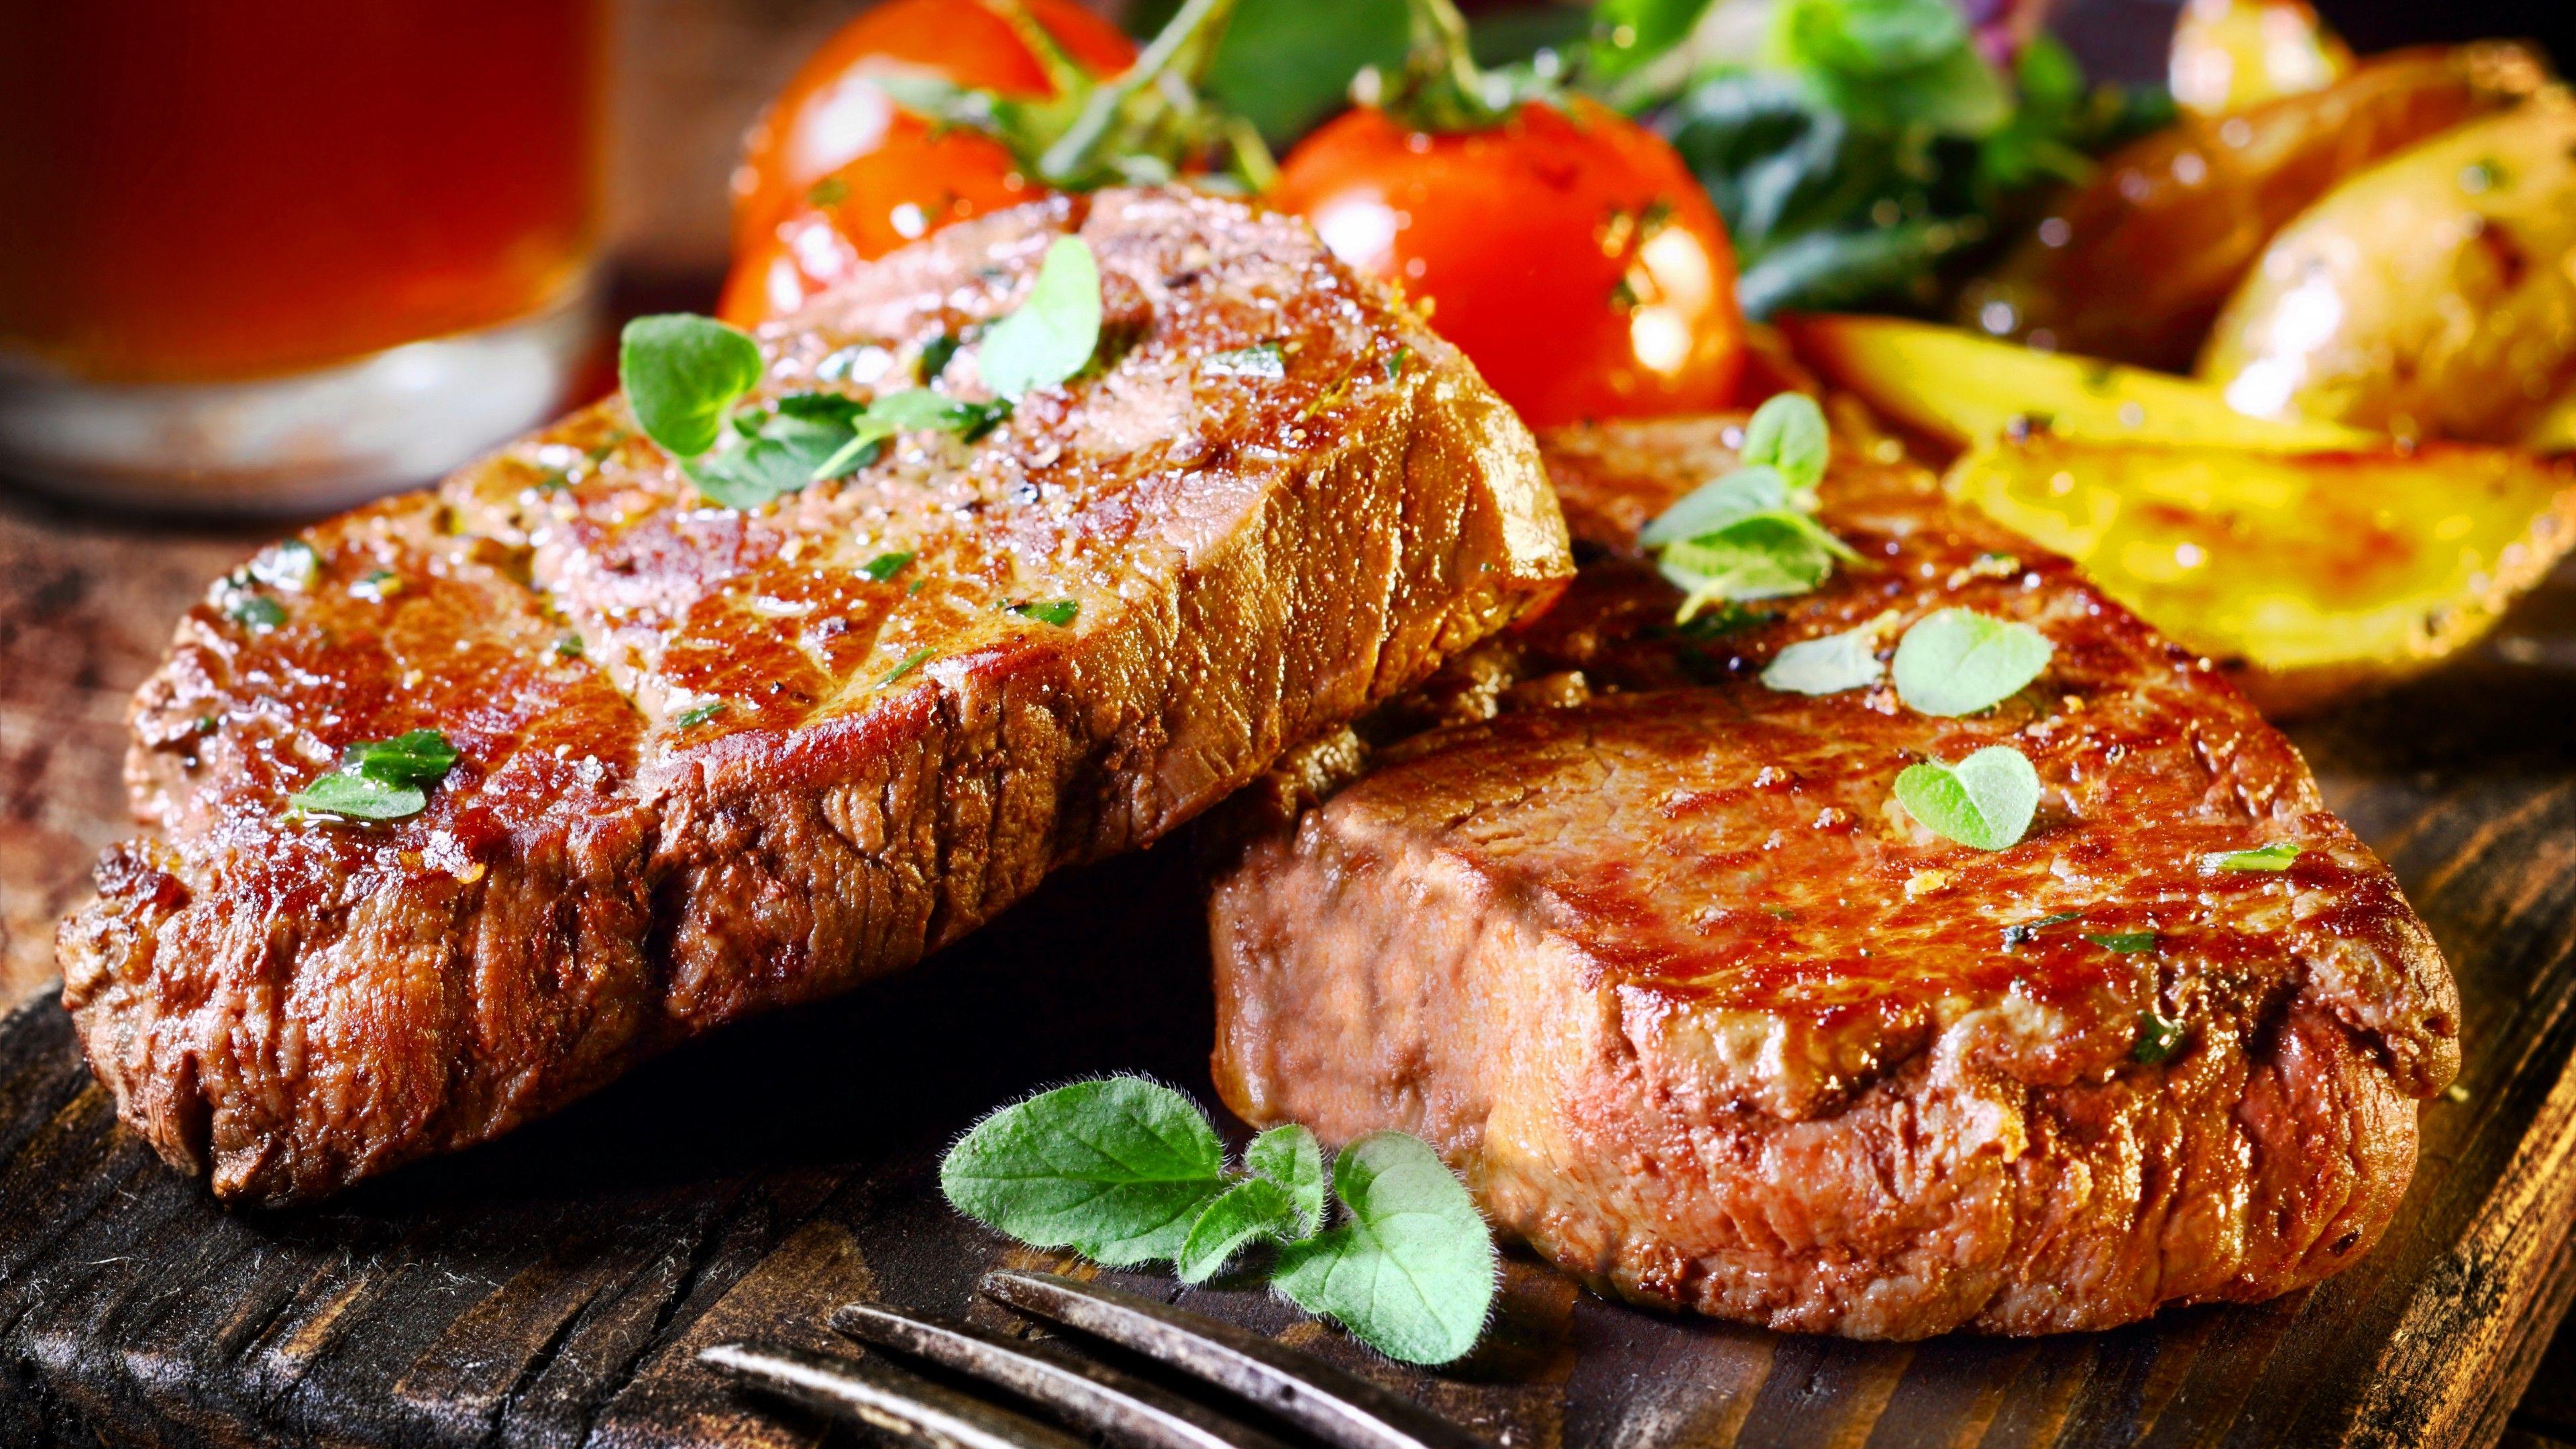 Steak Wallpapers Top Free Steak Backgrounds Wallpaperaccess Images, Photos, Reviews